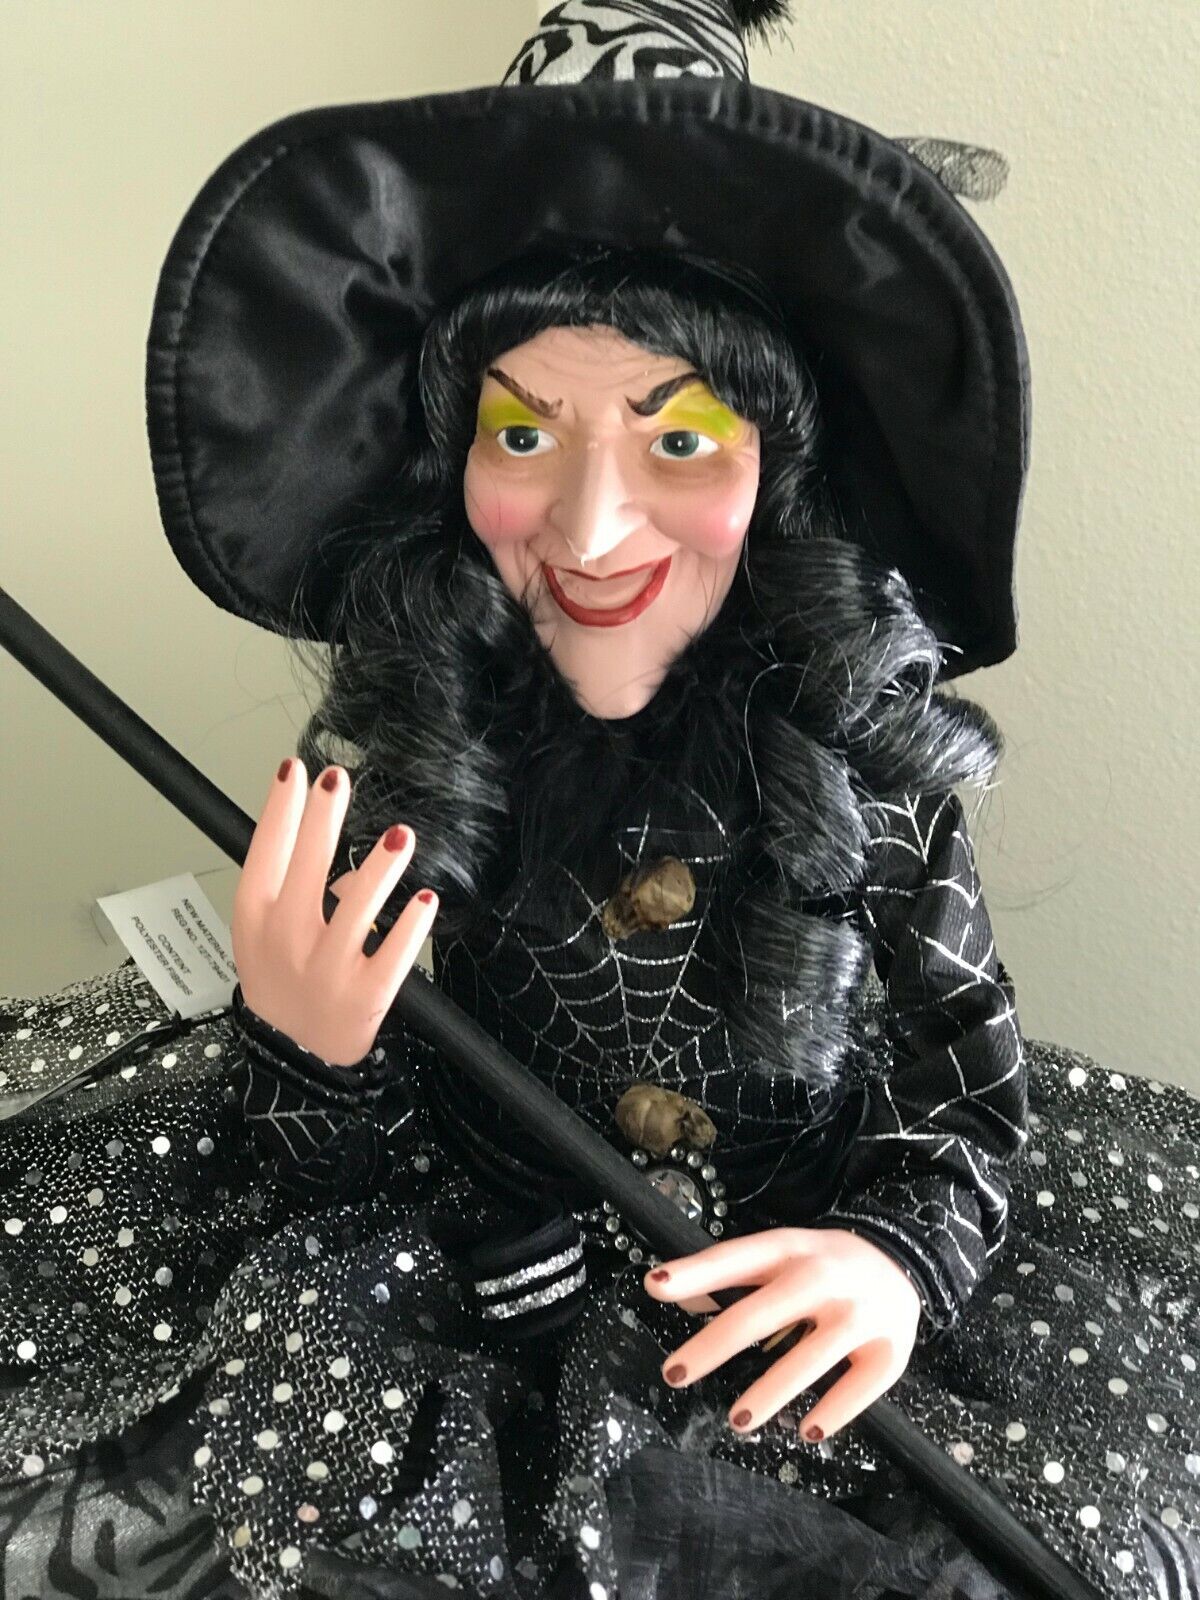 Pier 1 Imports Agnes Broomsbury the Halloween Shelf Sitting Witch 2019